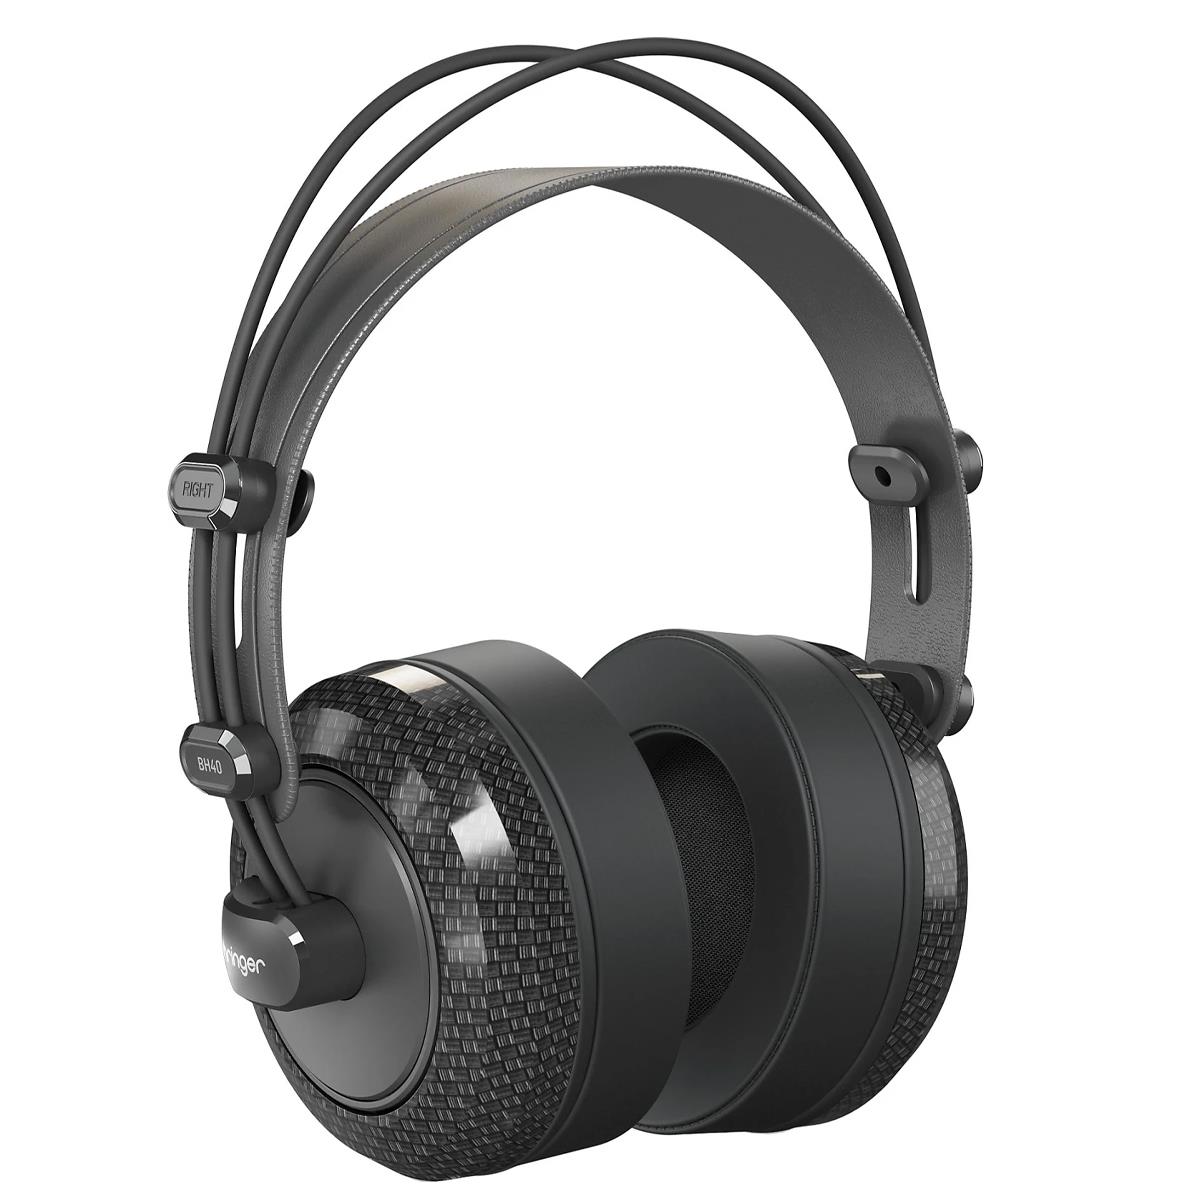 Image of Behringer BH40 Premium Circum-Aural Wired High-Fidelity Over-Ear Headphones